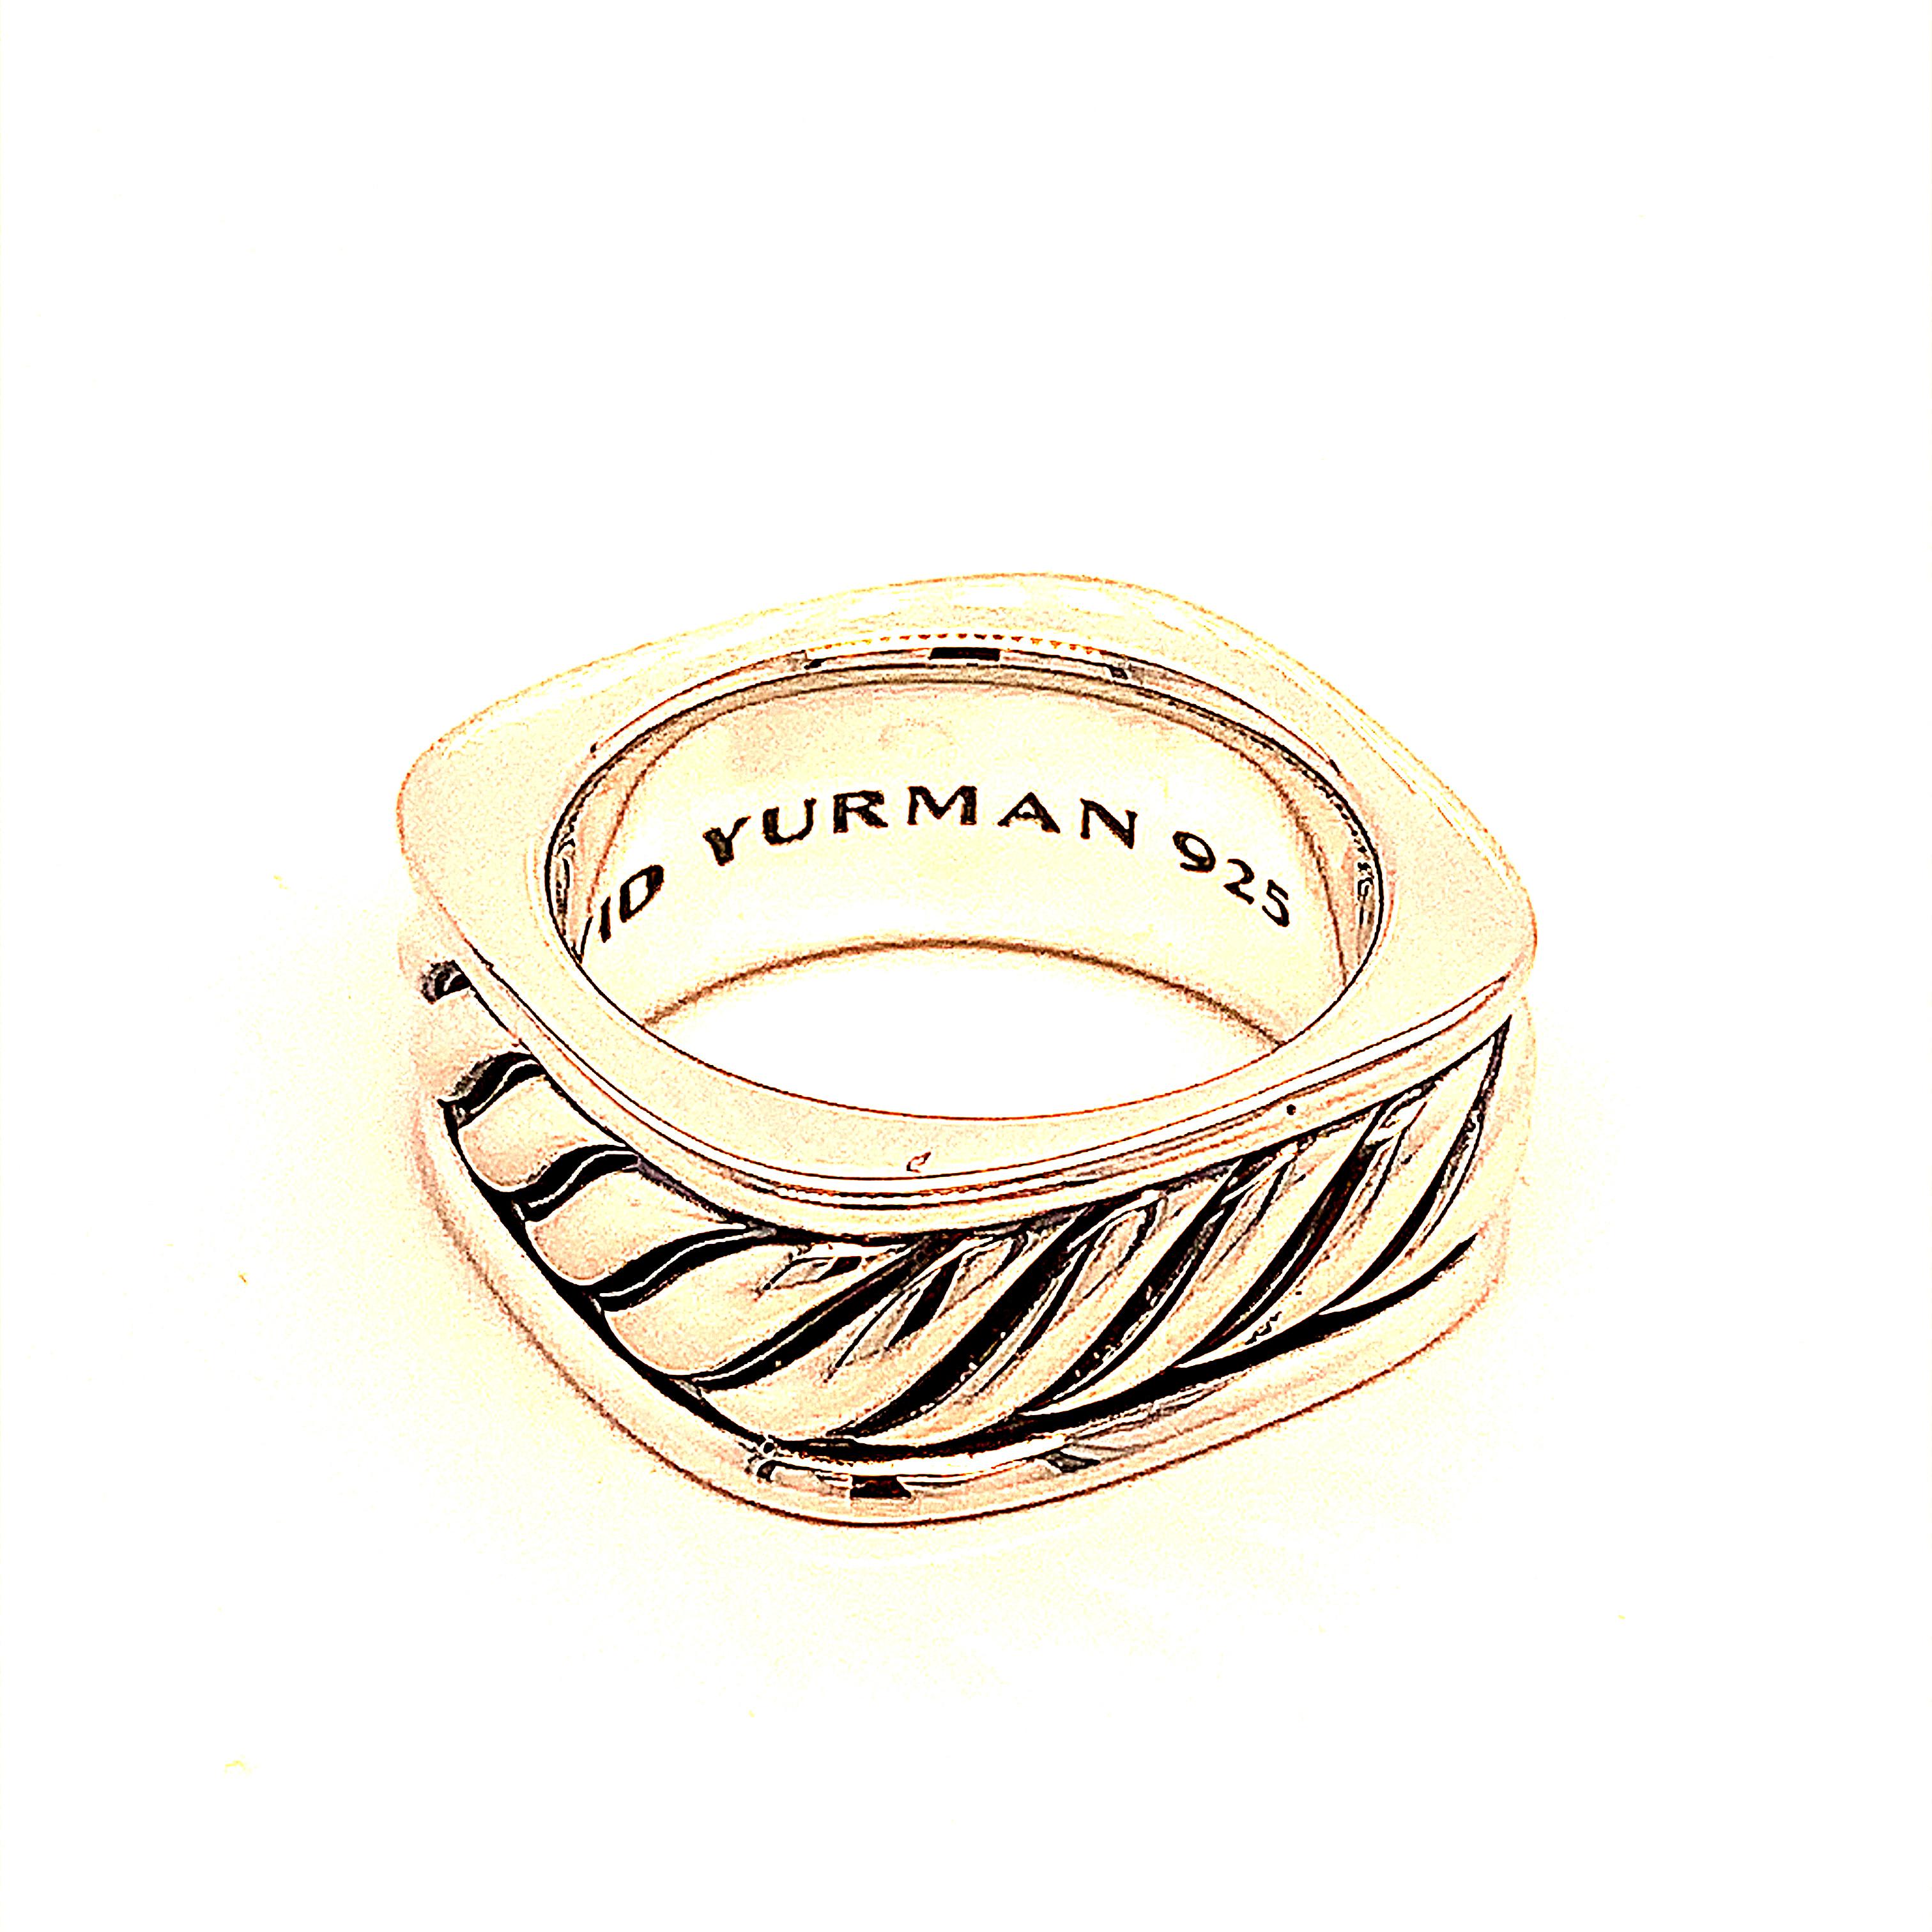 David Yurman Authentic Estate Mens Ring 7.5 Sterling Silver DY207

Retail: $799

This elegant Authentic David Yurman ring is made of sterling silver and has a weight of 14.10 grams.

TRUSTED SELLER SINCE 2002

PLEASE SEE OUR HUNDREDS OF POSITIVE